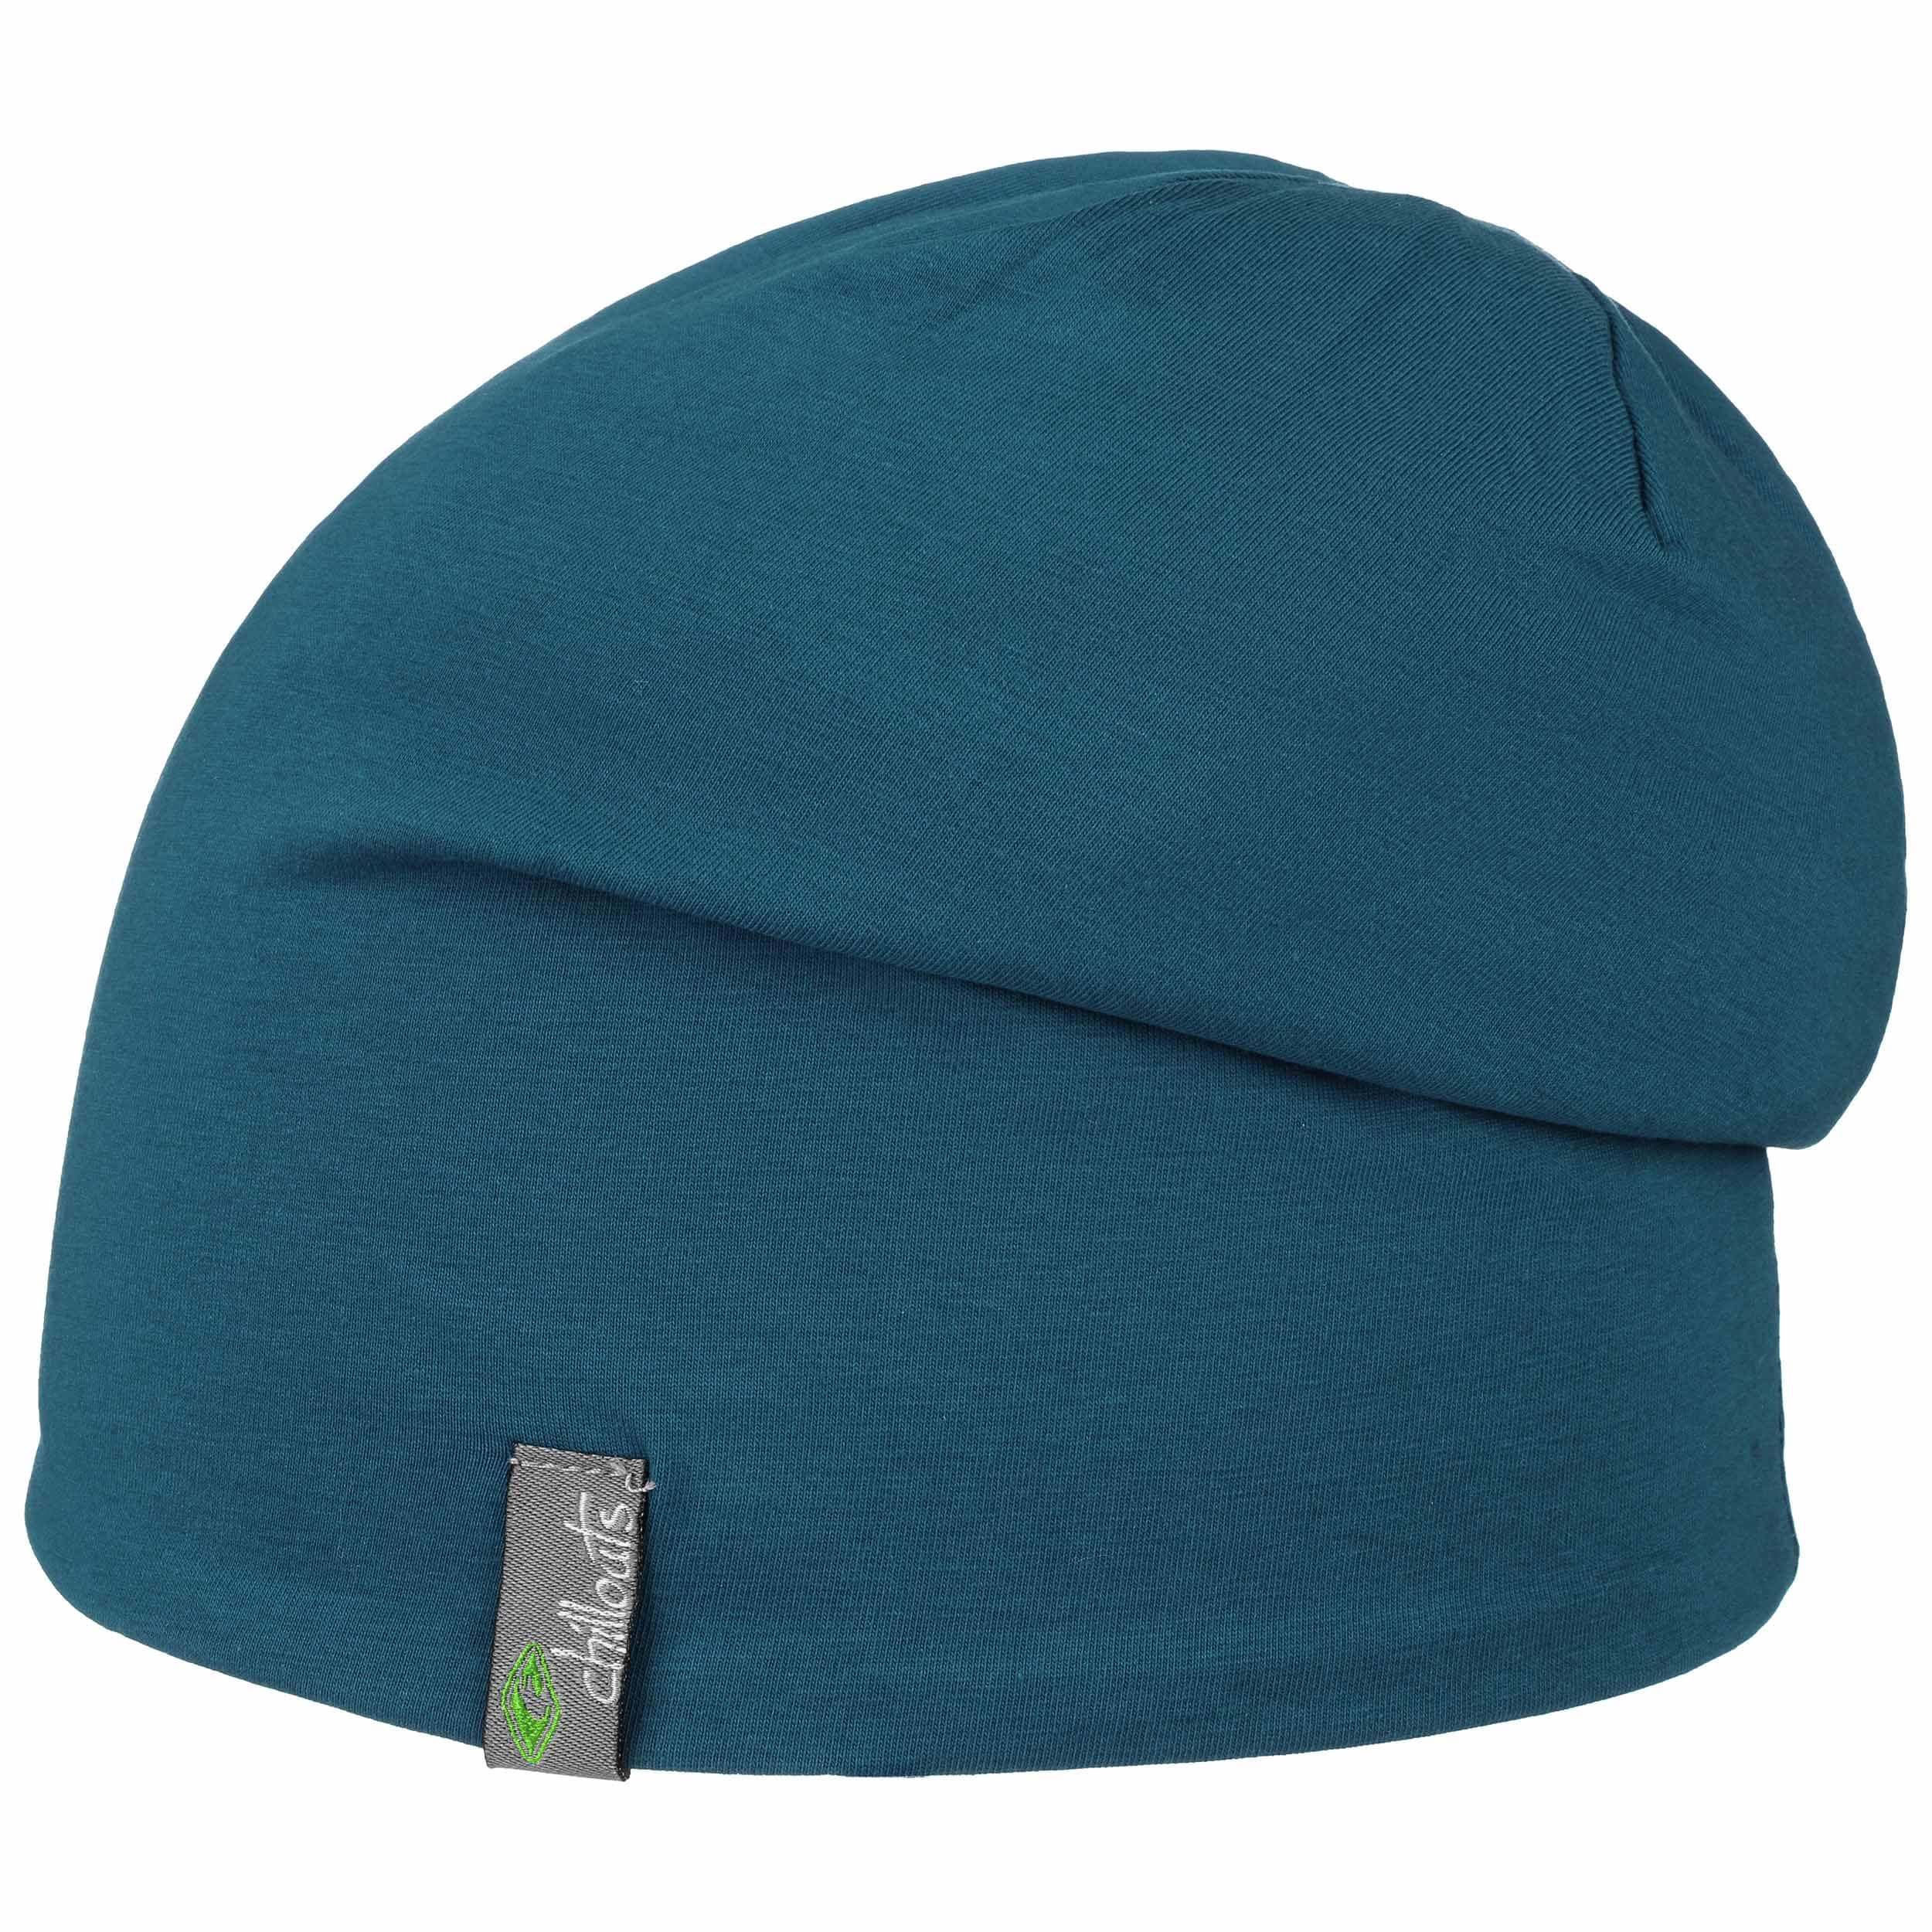 Acapulco Oversize Beanie by Chillouts --> Shop Hats, Beanies & Caps online  ▷ Hatshopping